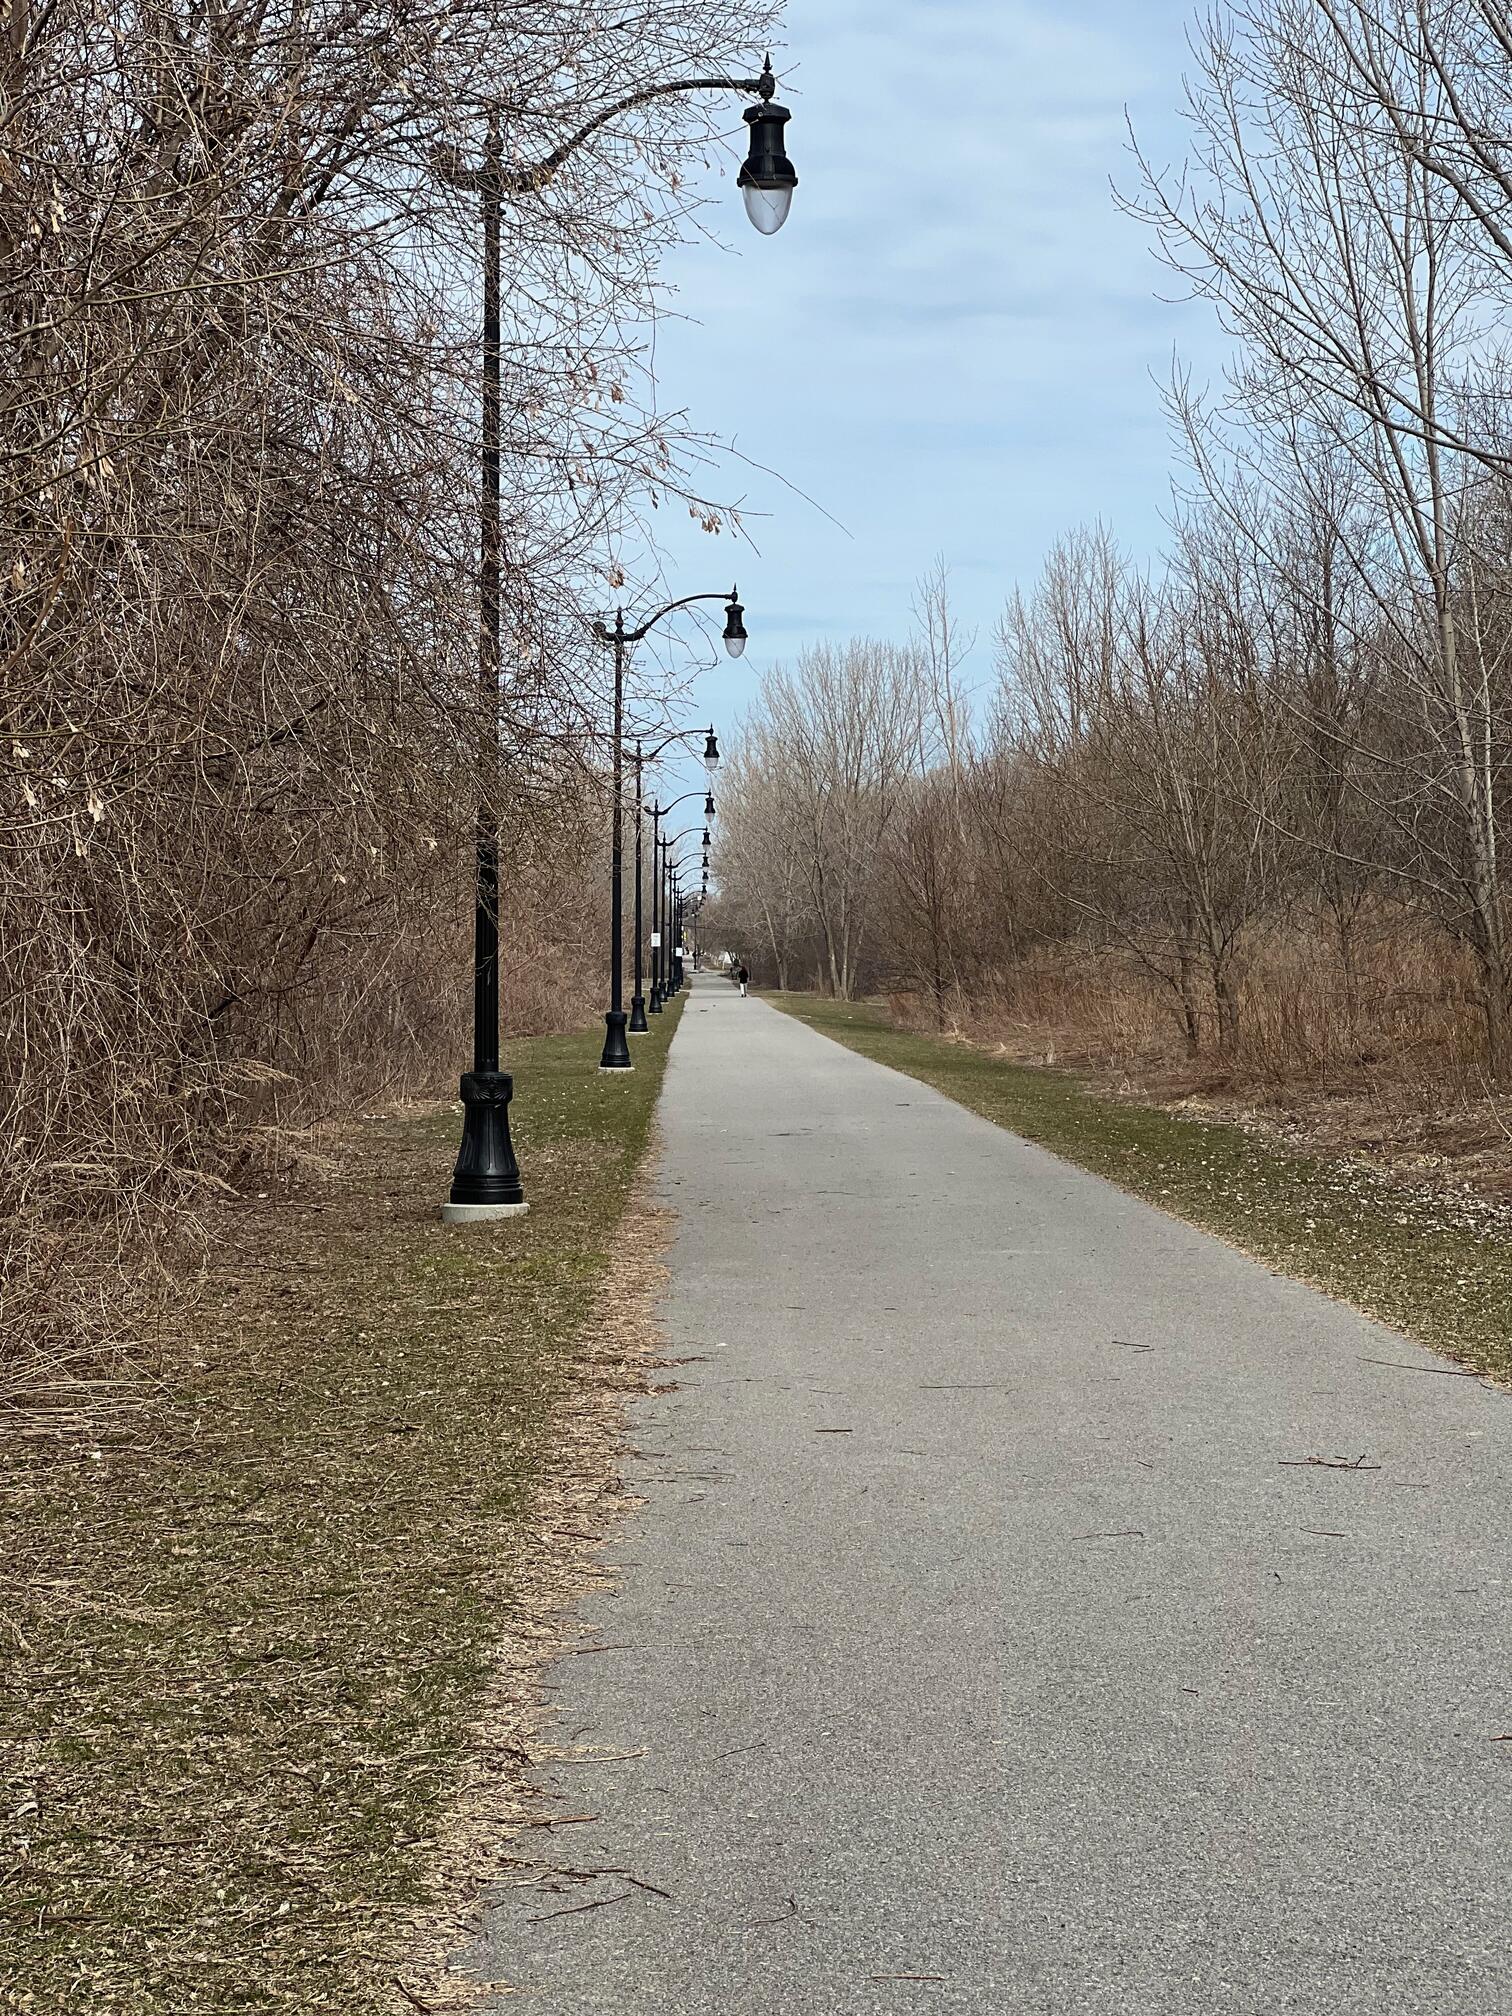 lampposts along the trail